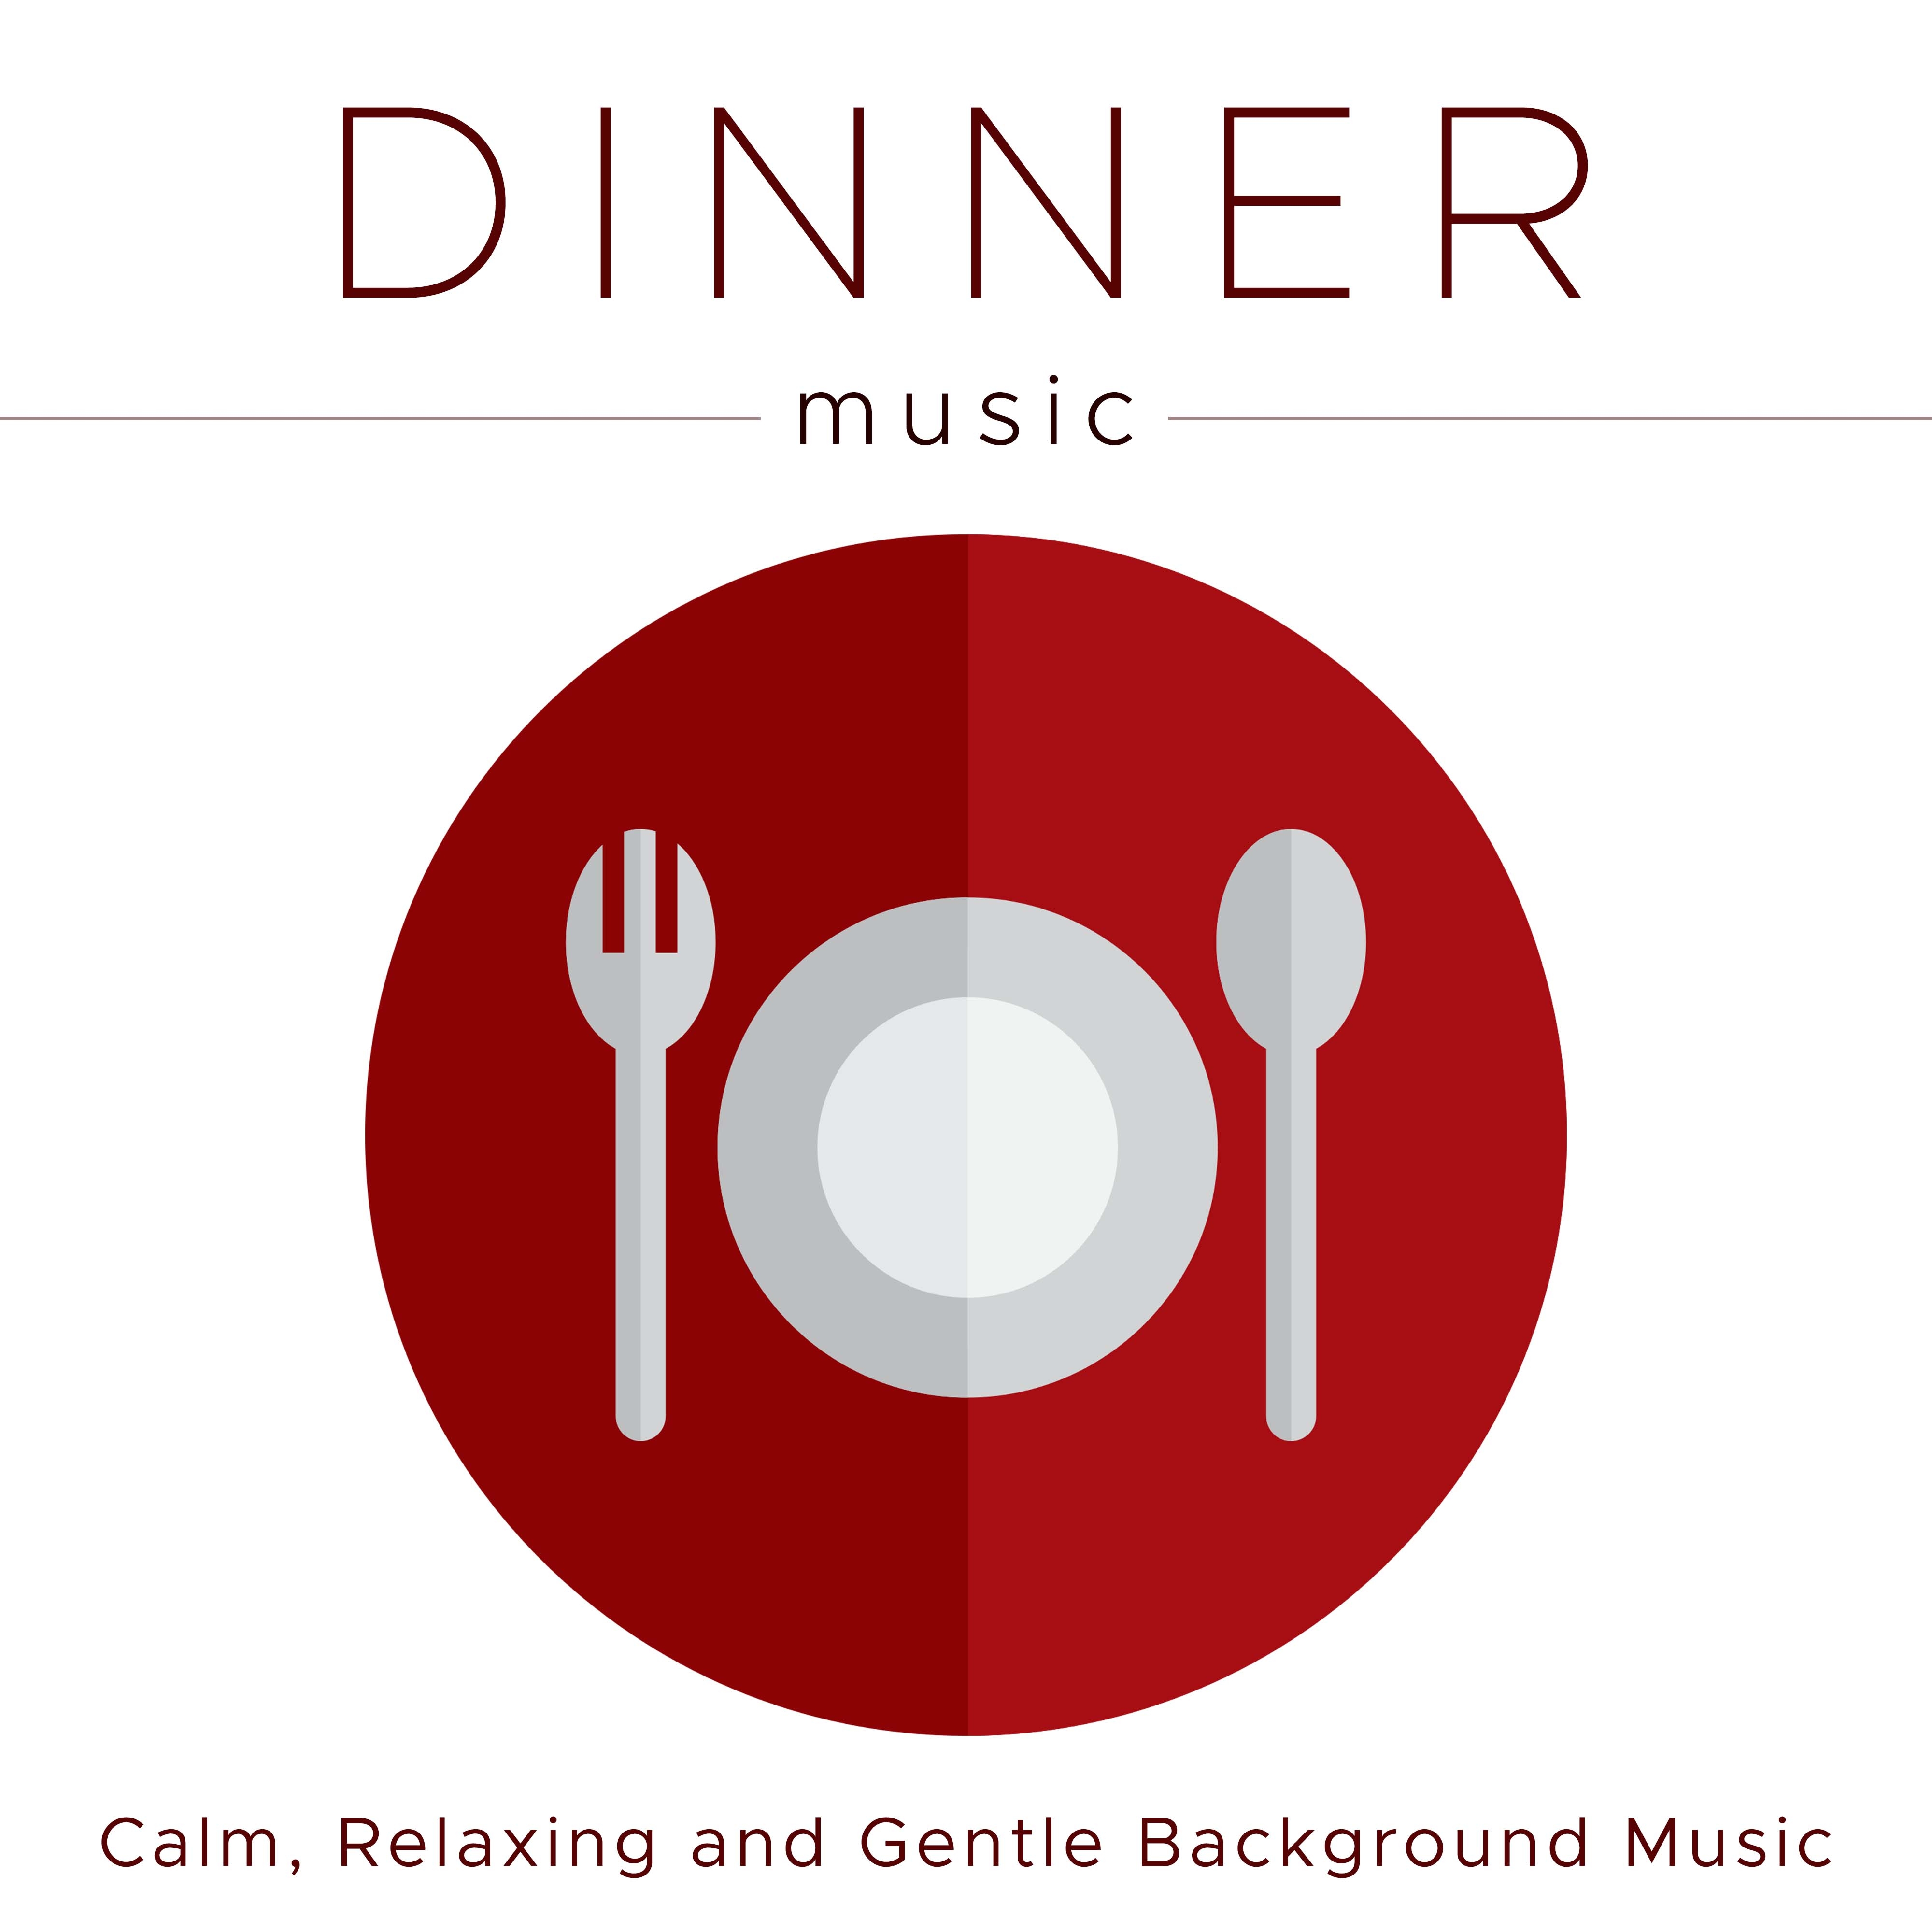 Dinner Music - Calm, Relaxing and Gentle Background Music